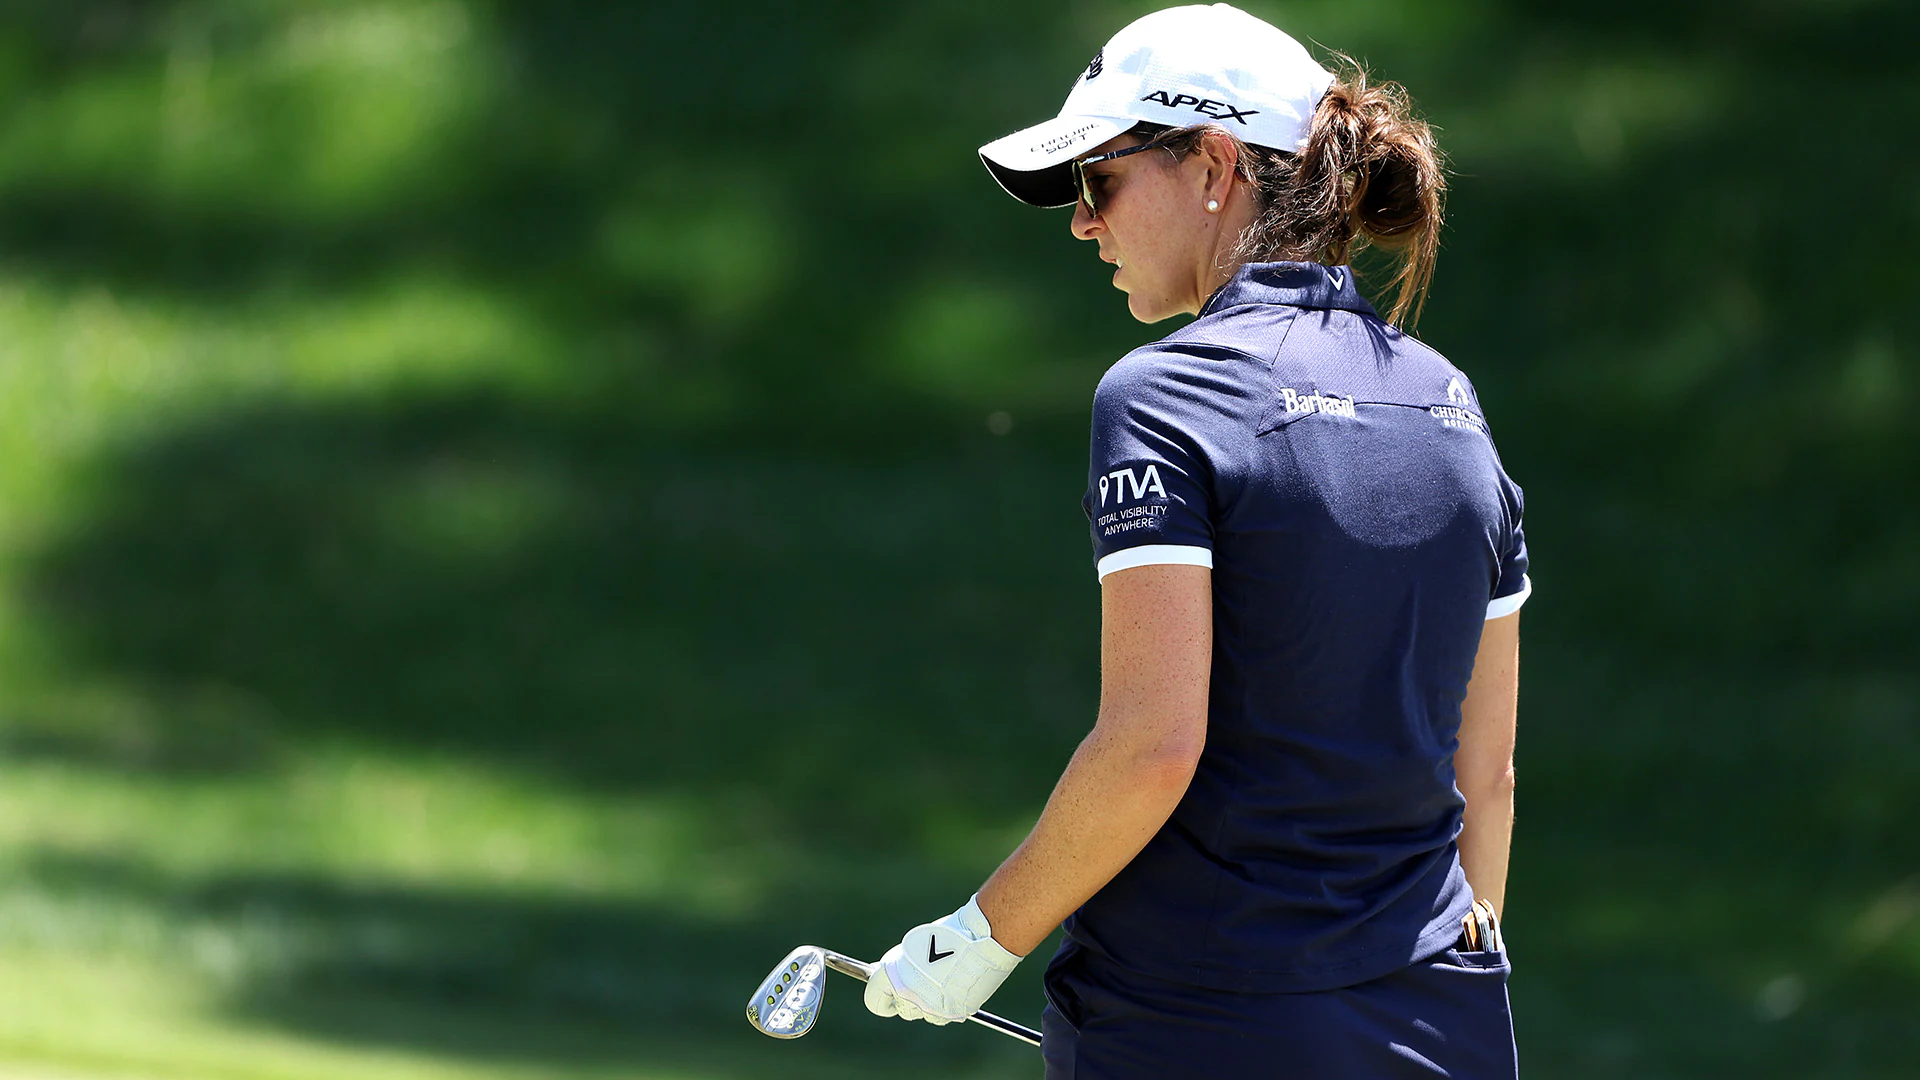 Emma Talley breaks putter, putts with wedge at KPMG Women’s PGA Championship